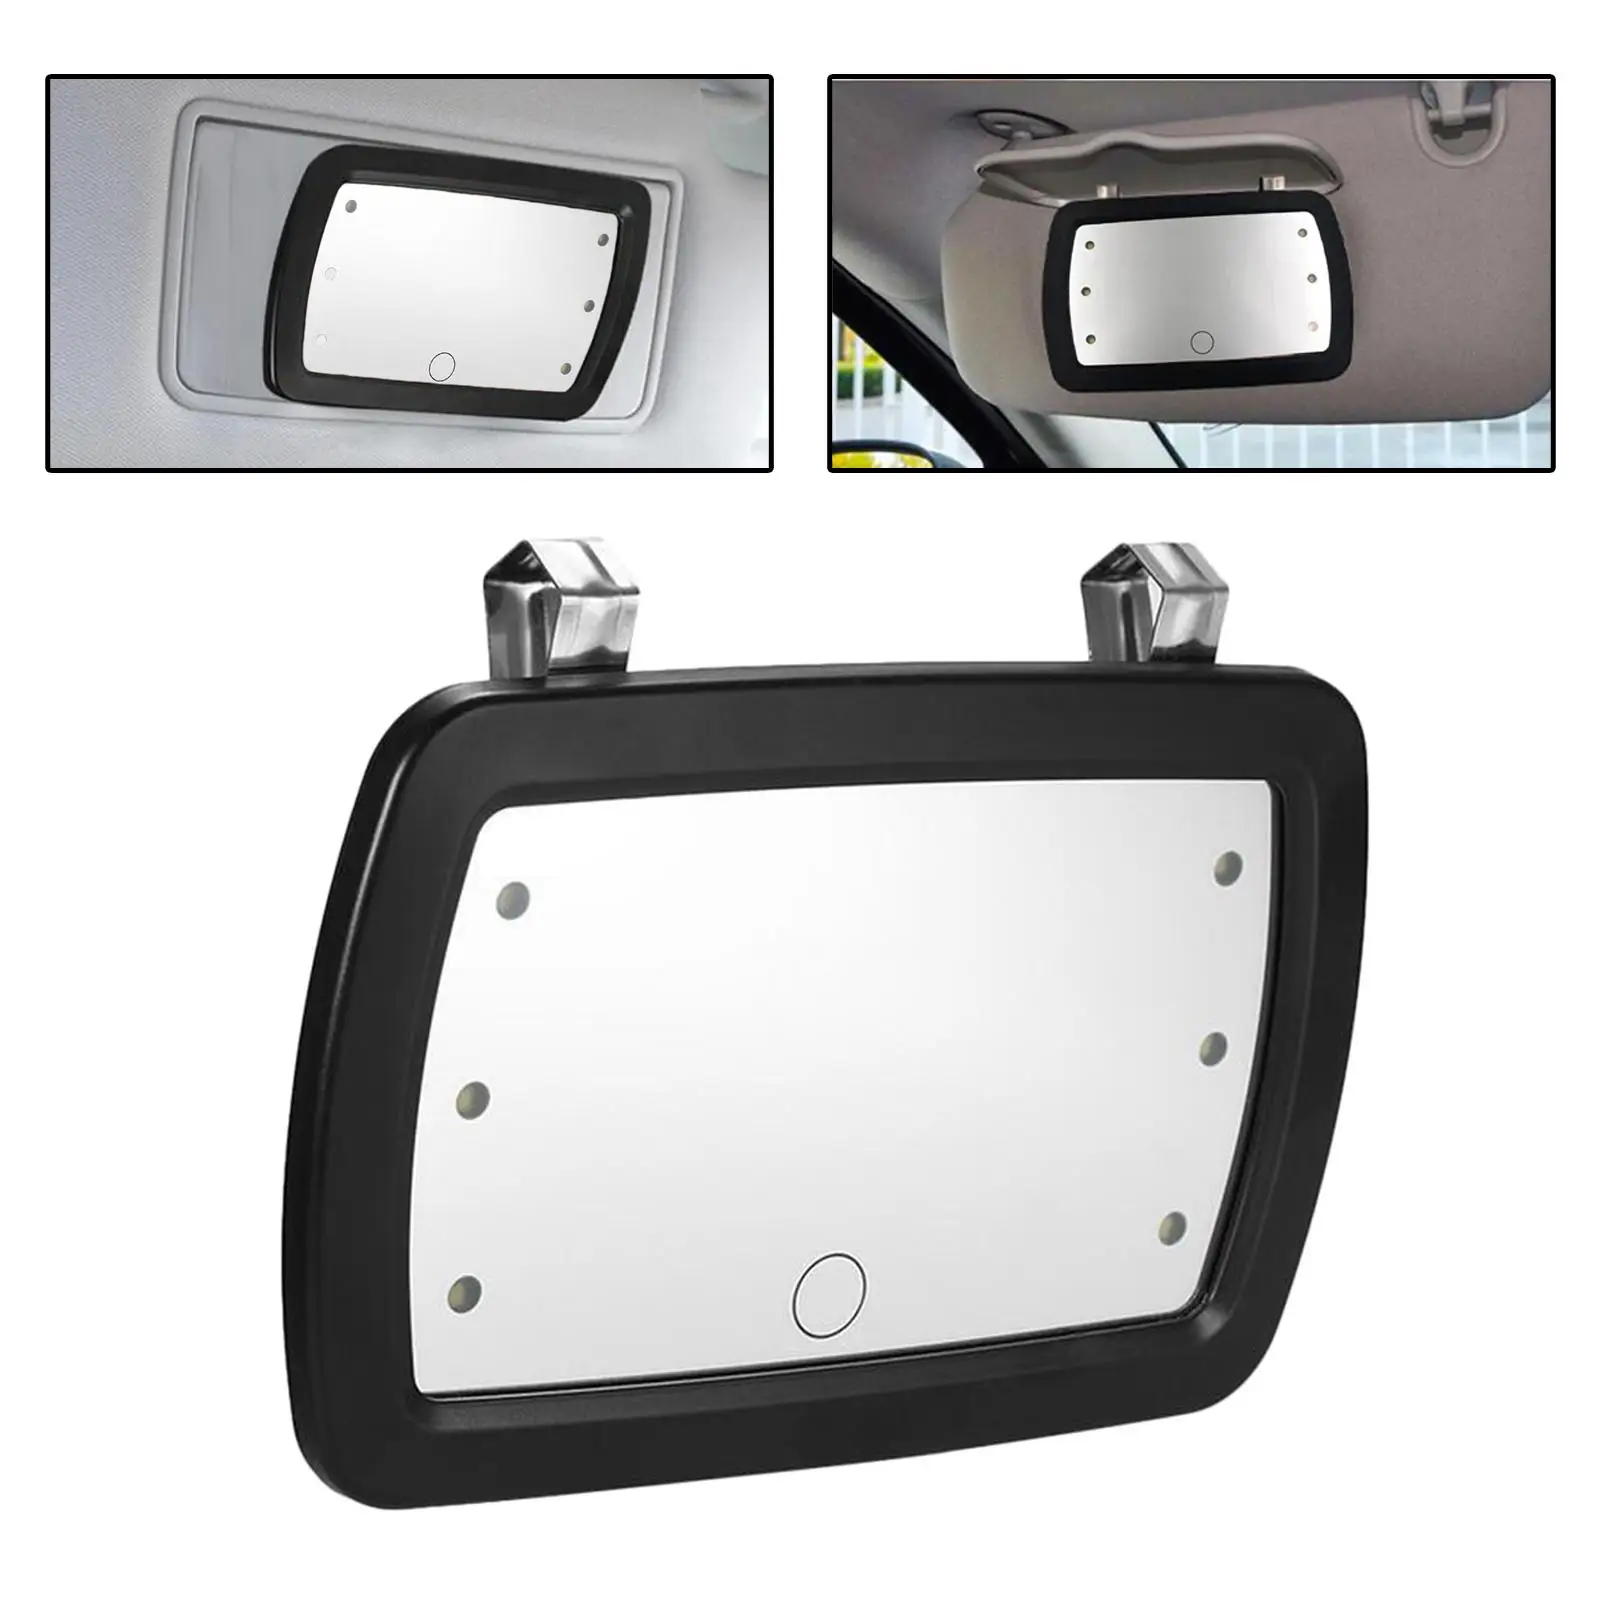  Visor Mirror  Interior Mirror with 6 LED Lights Makeup  for Automobile Vacation Long 